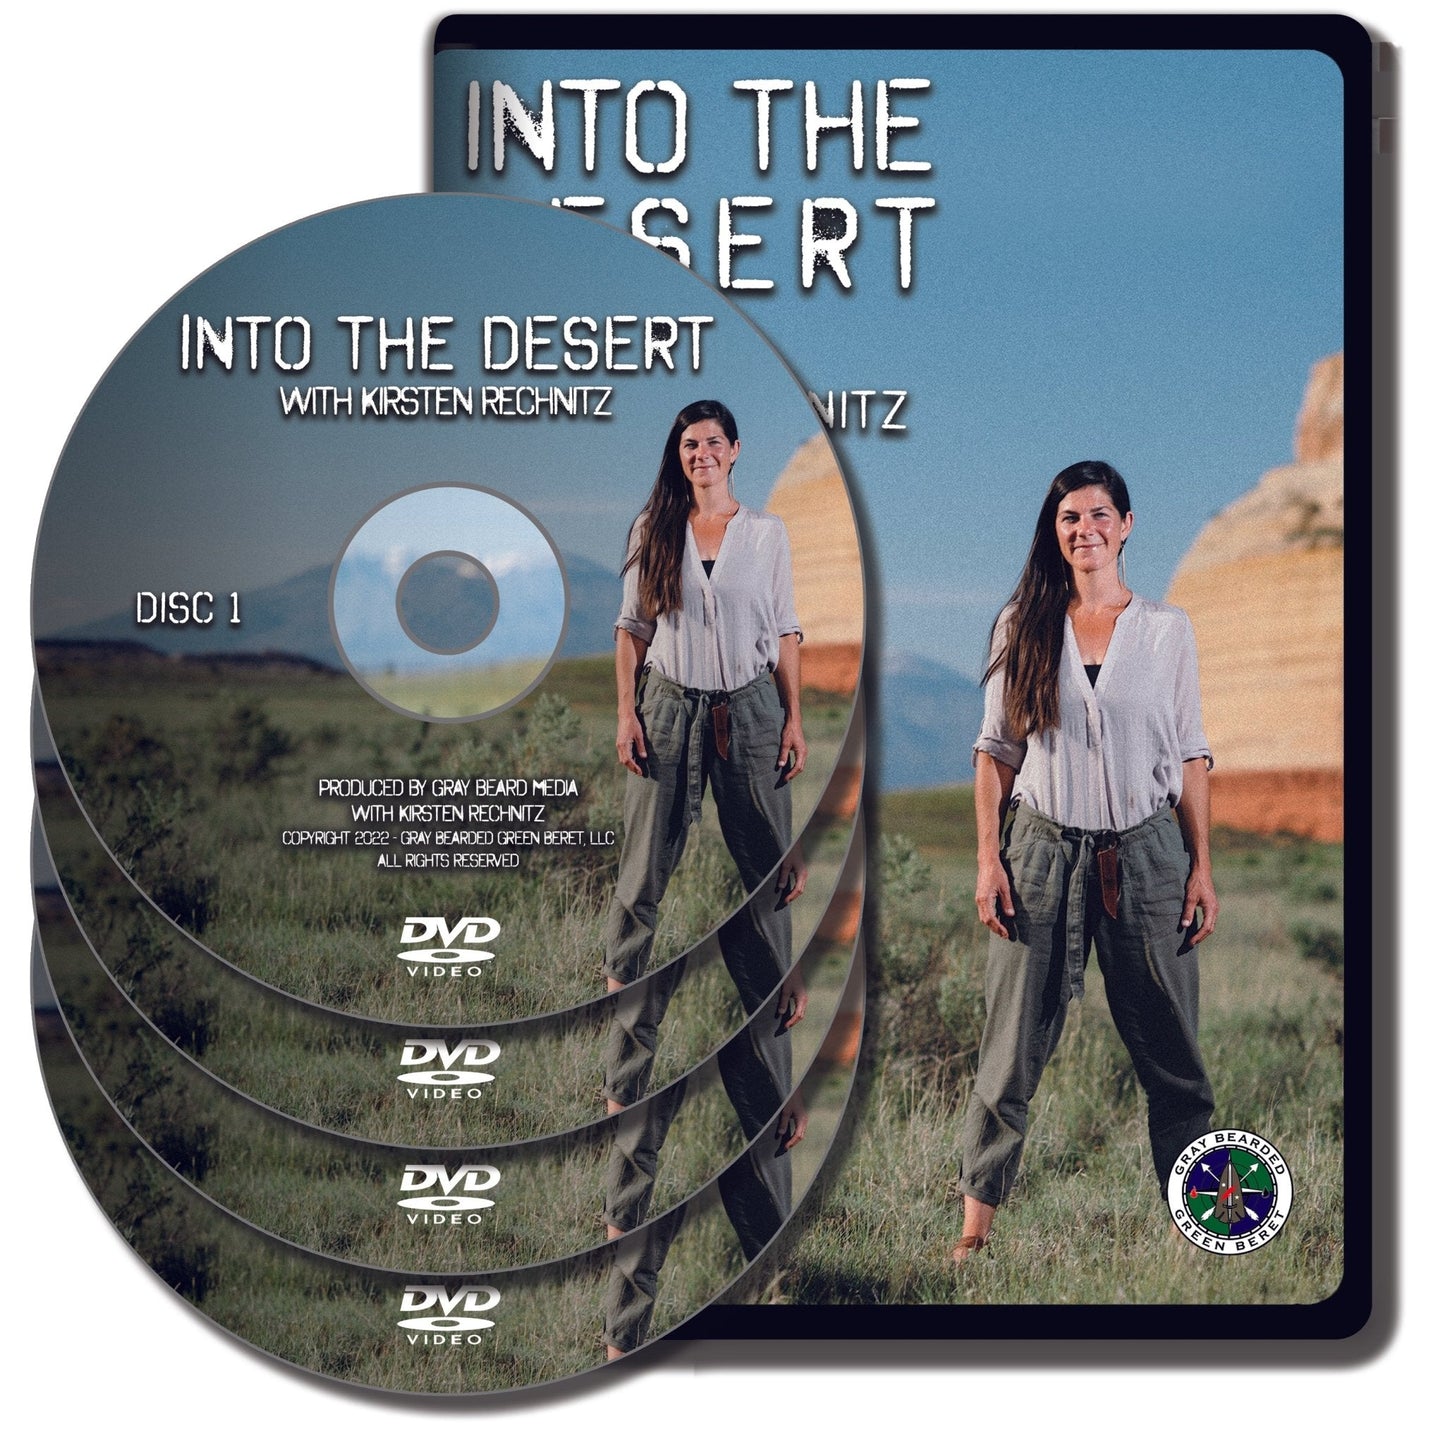 Into the Desert with Kirsten Rechnitz DVD + Free Streaming Limited Offer - Gray Bearded Green Beret